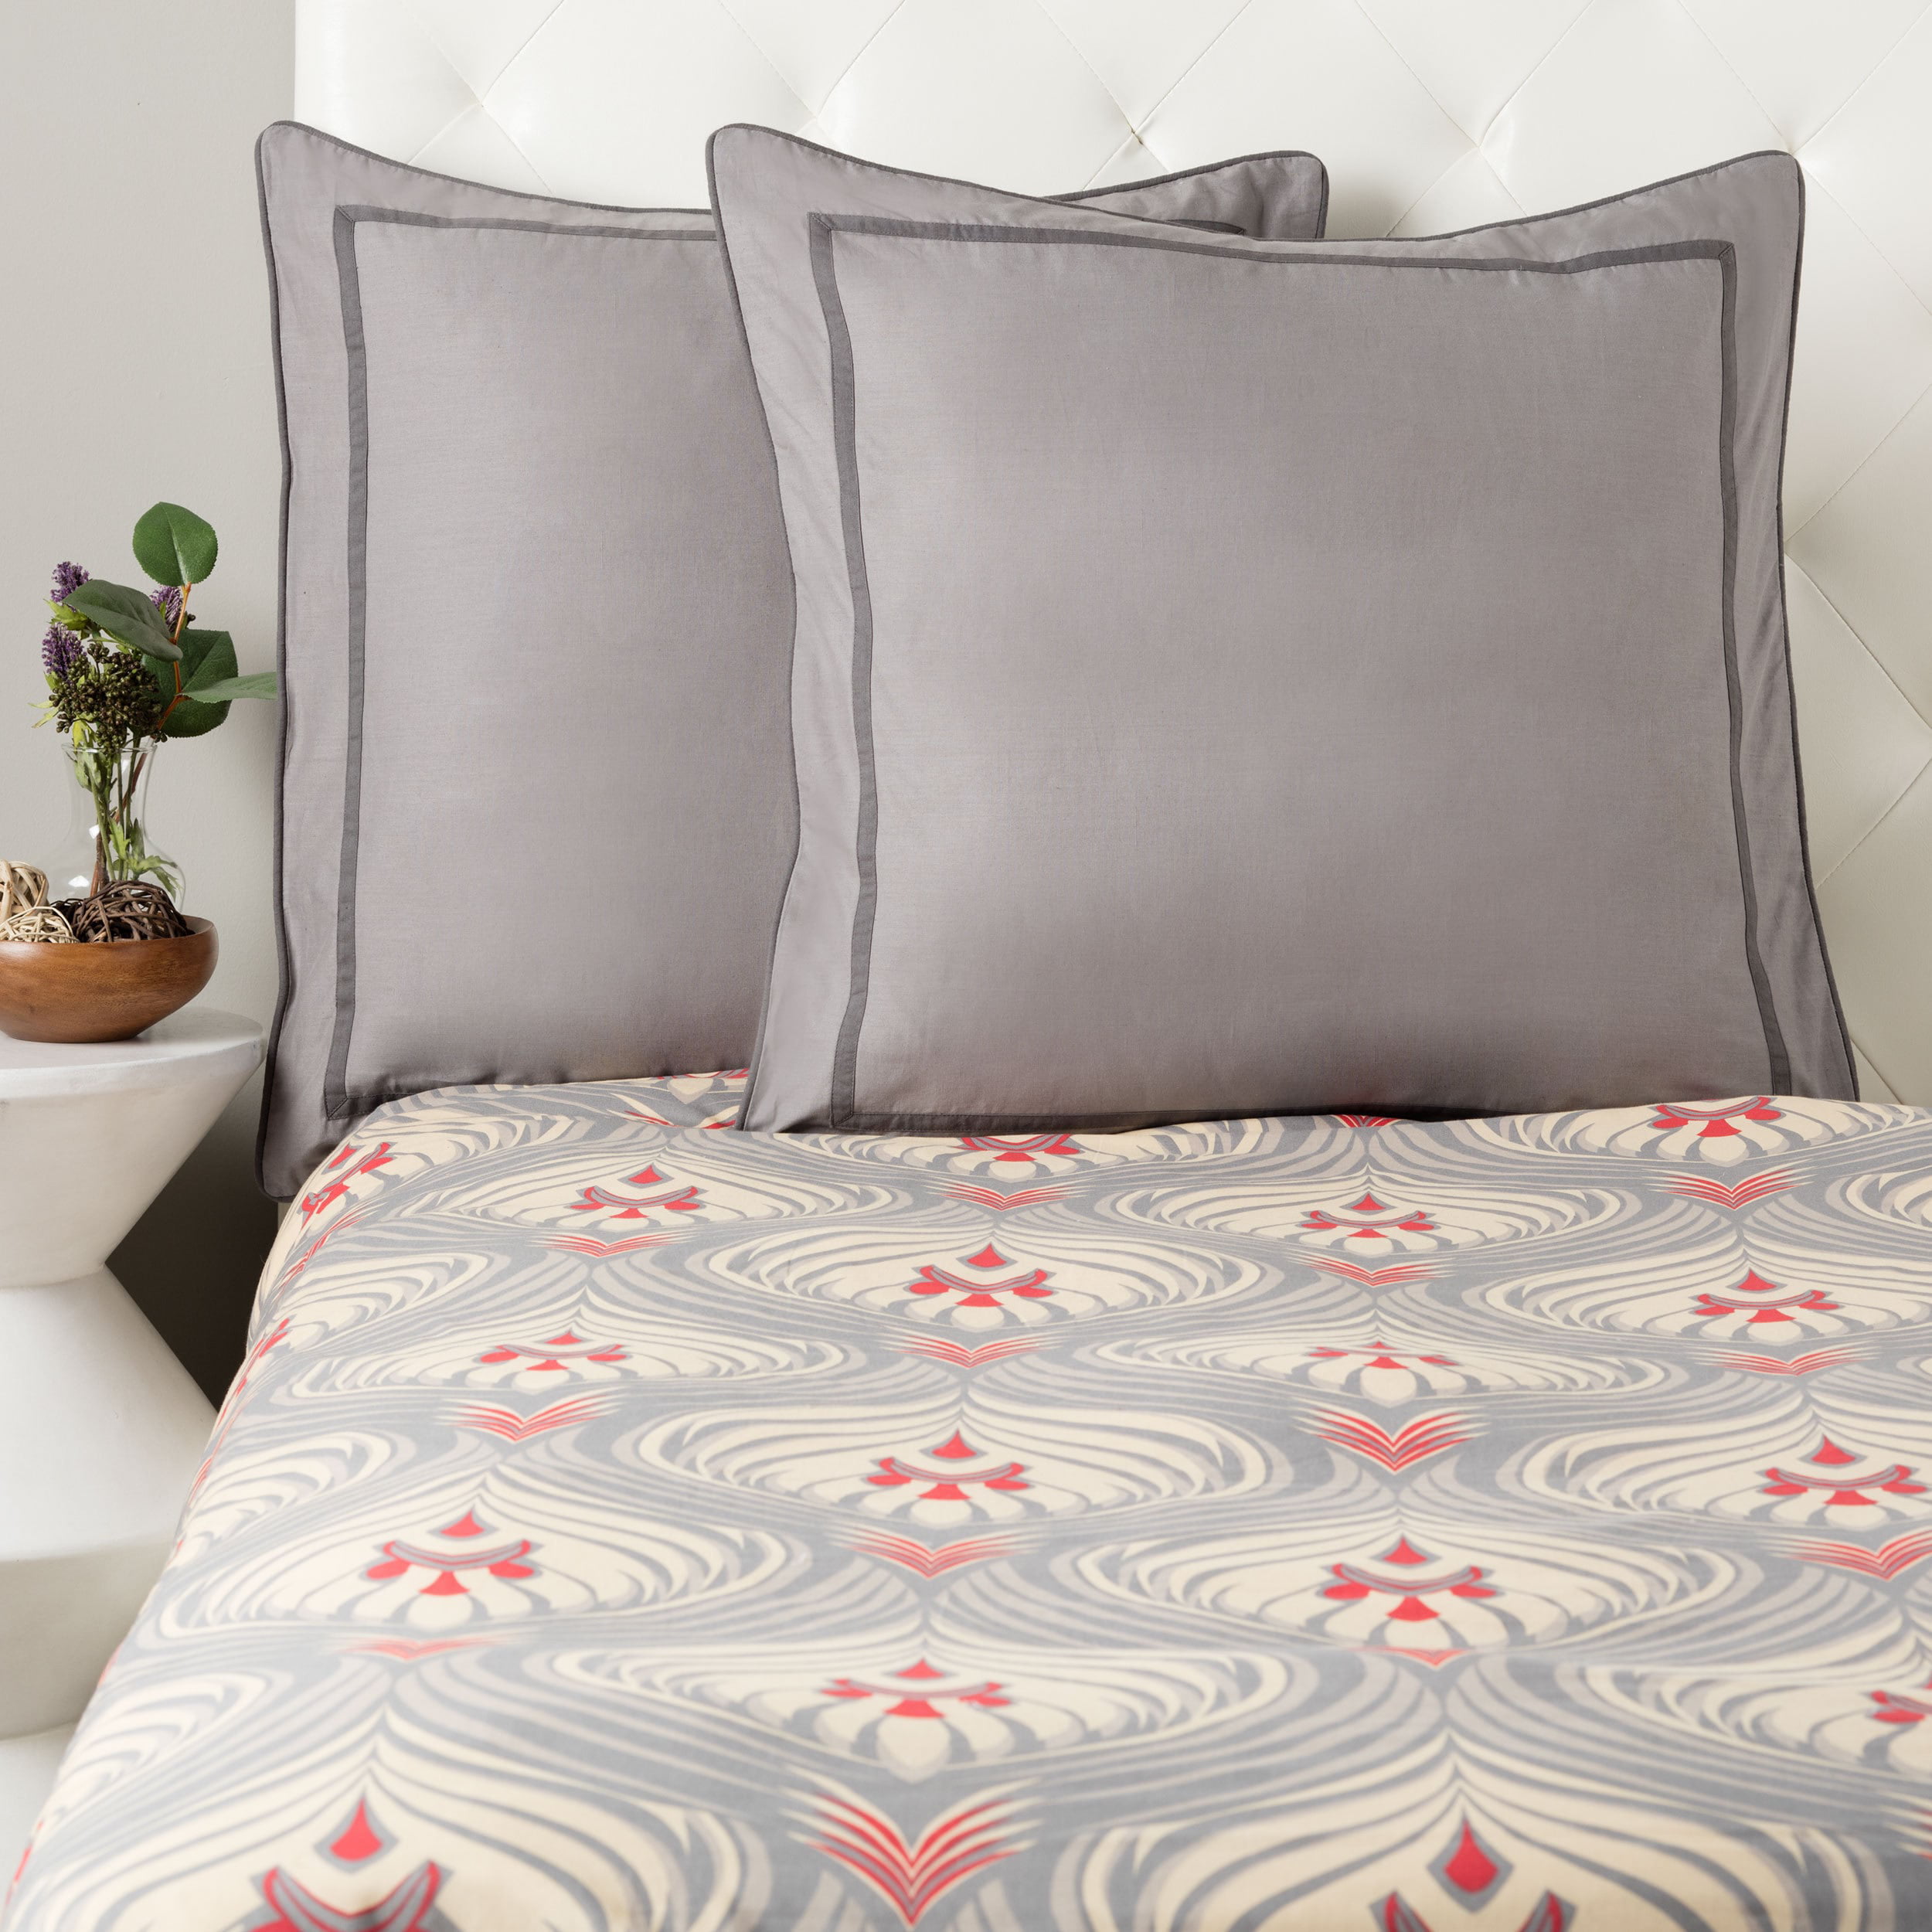 Anthology Kendall Standard Pillow Sham in Oatmeal 